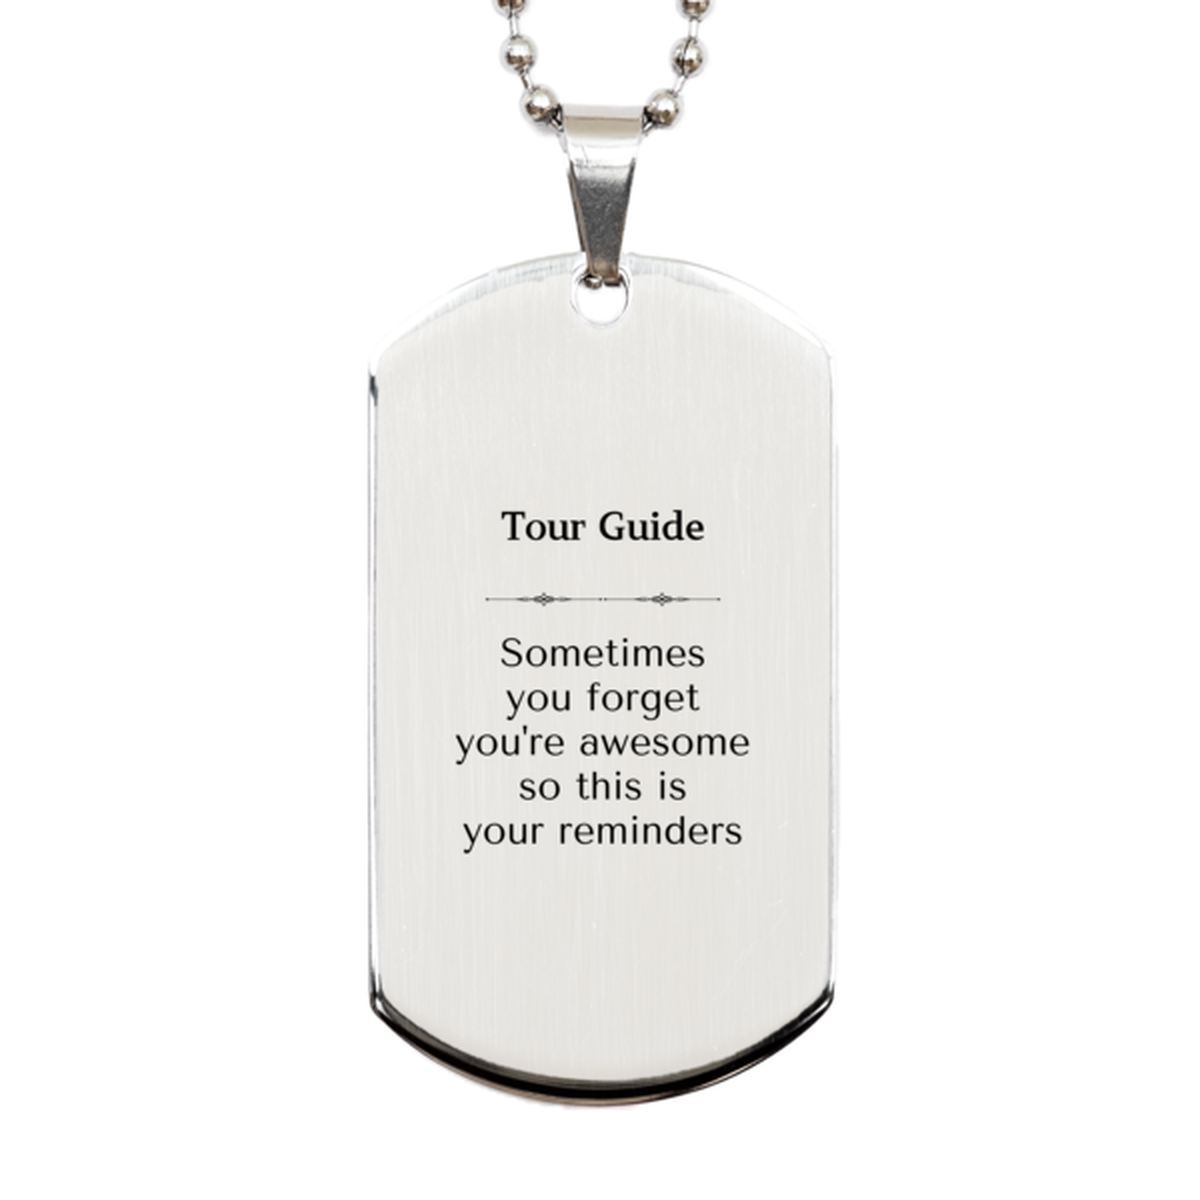 Sentimental Tour Guide Silver Dog Tag, Tour Guide Sometimes you forget you're awesome so this is your reminders, Graduation Christmas Birthday Gifts for Tour Guide, Men, Women, Coworkers